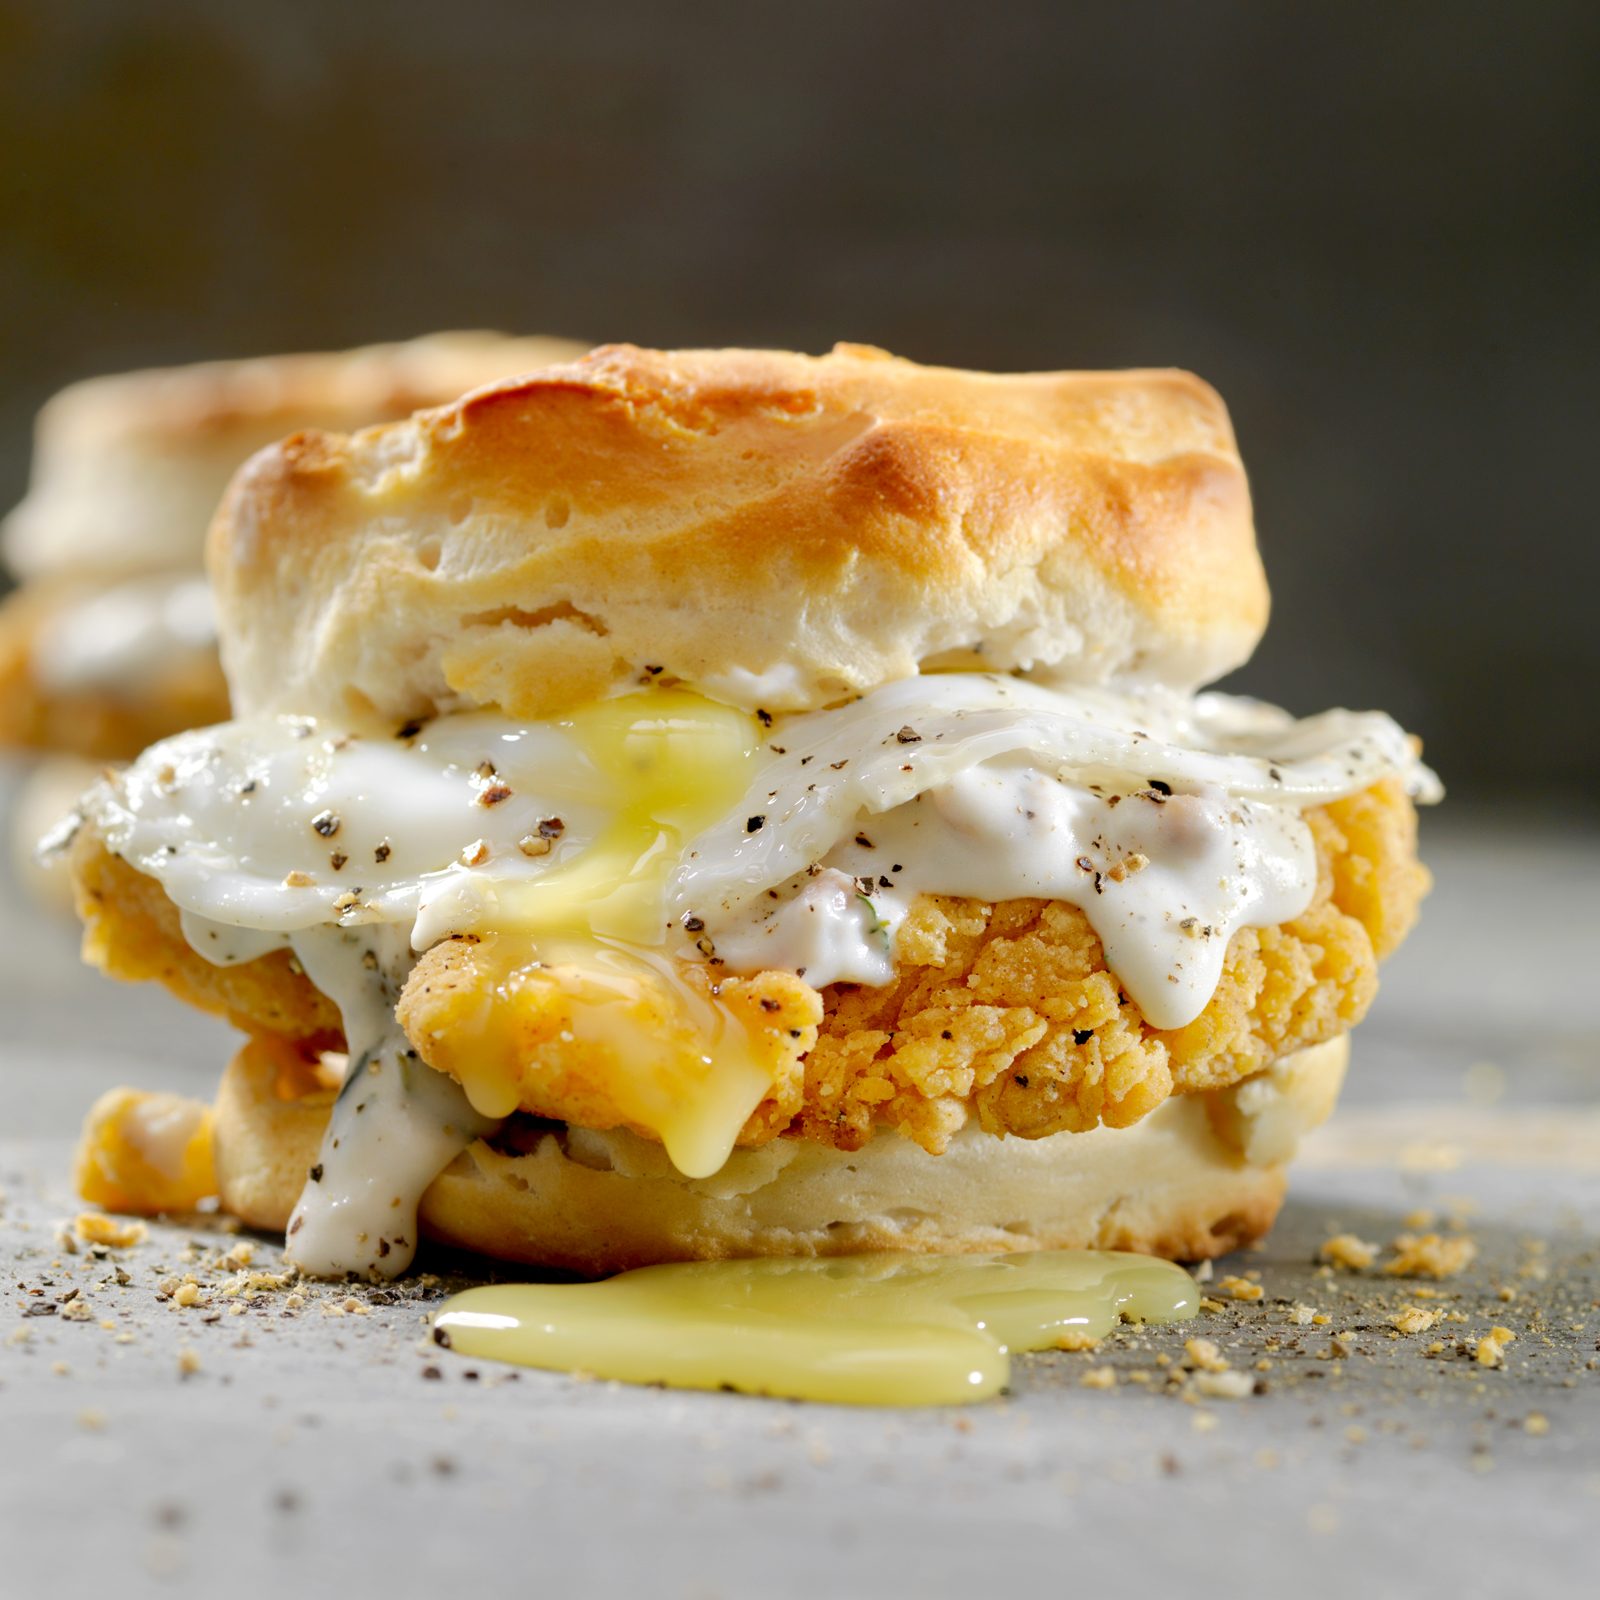 Fried Chicken Sandwich with a Fried Egg,Sausage Gravy on a Biscuit